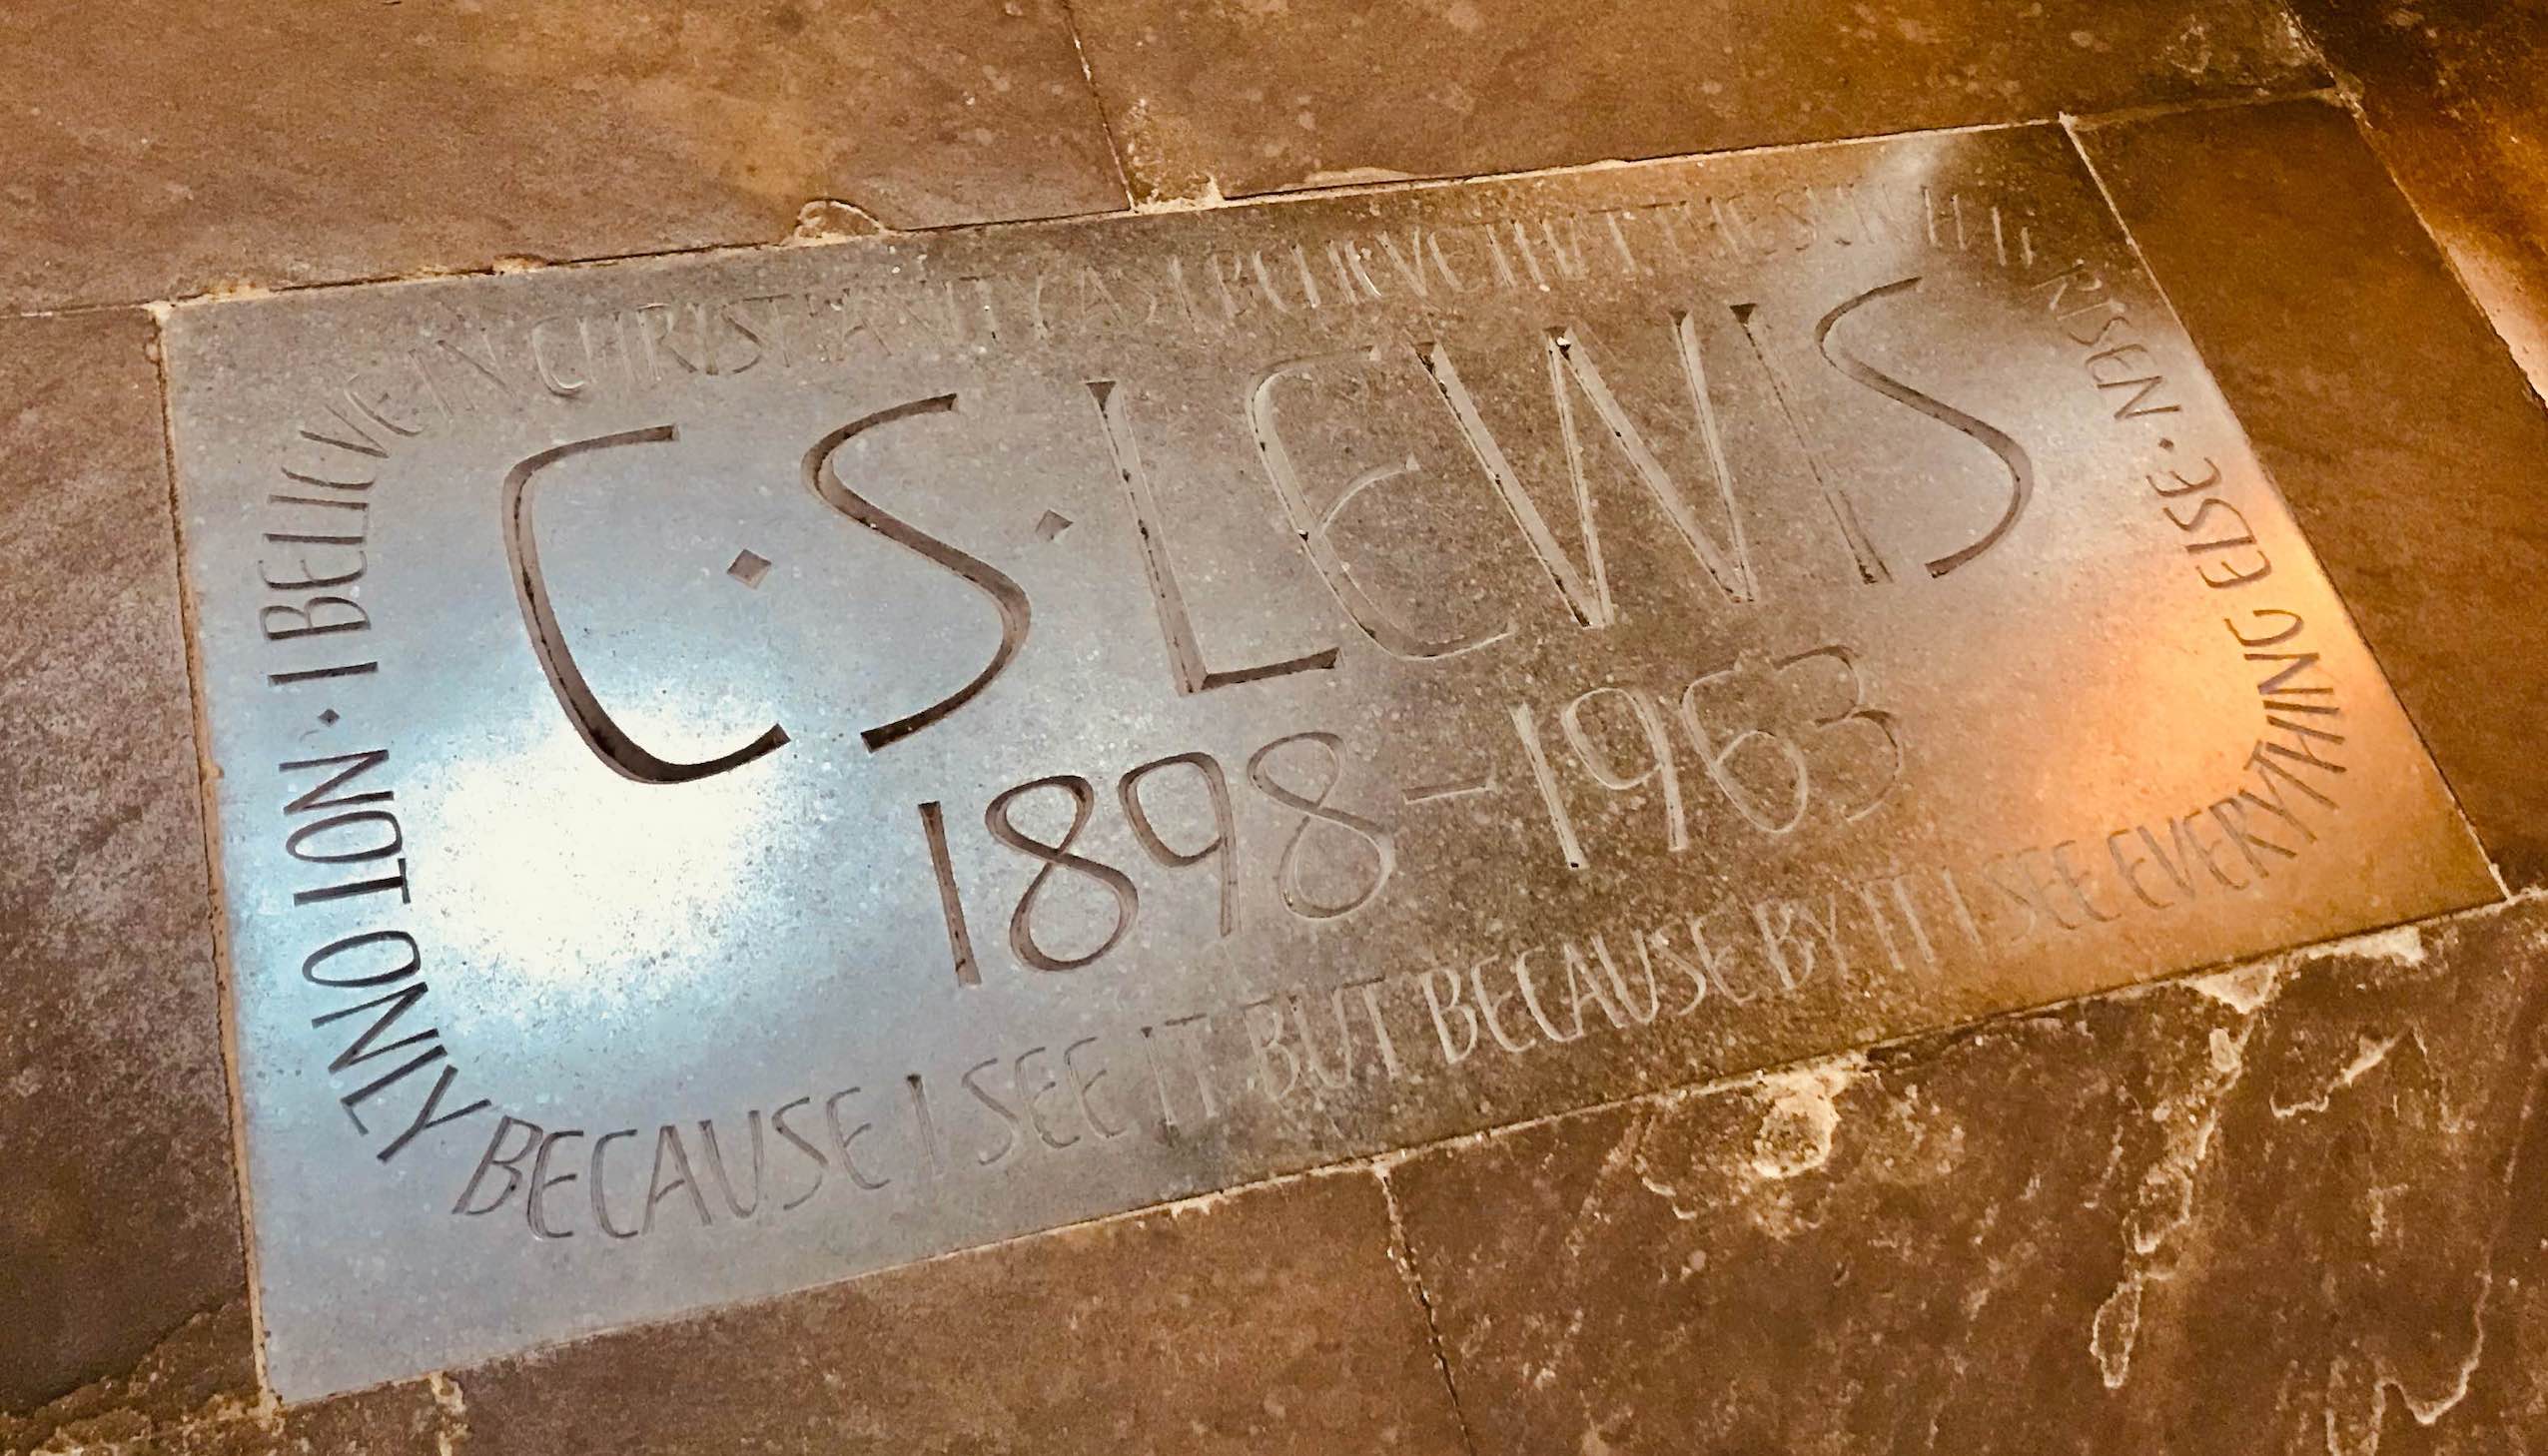 C.S. Lewis Westminster Abbey London